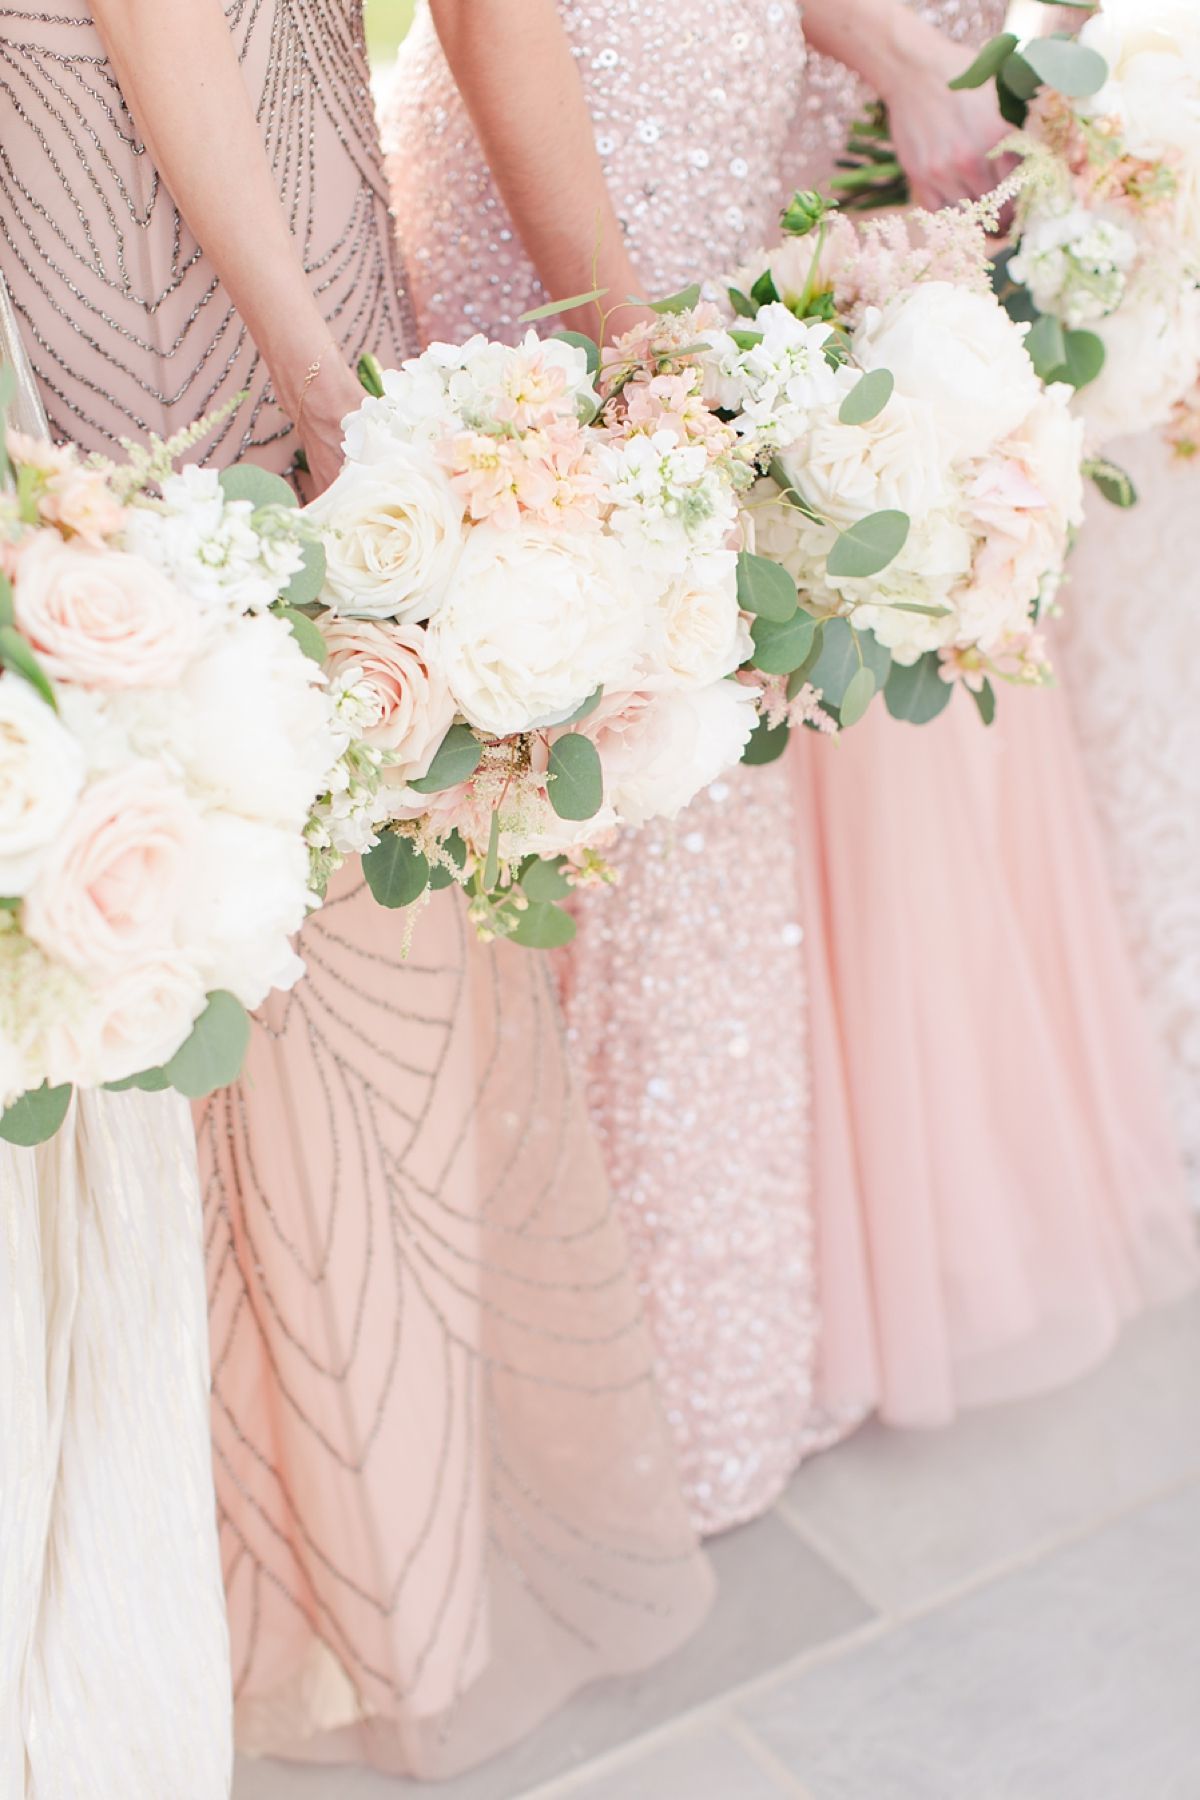 A Grey, Navy, Blush, Ivory and Lace Inspired Spring Wedding at Shadow Creek Weddings and Events by Kat